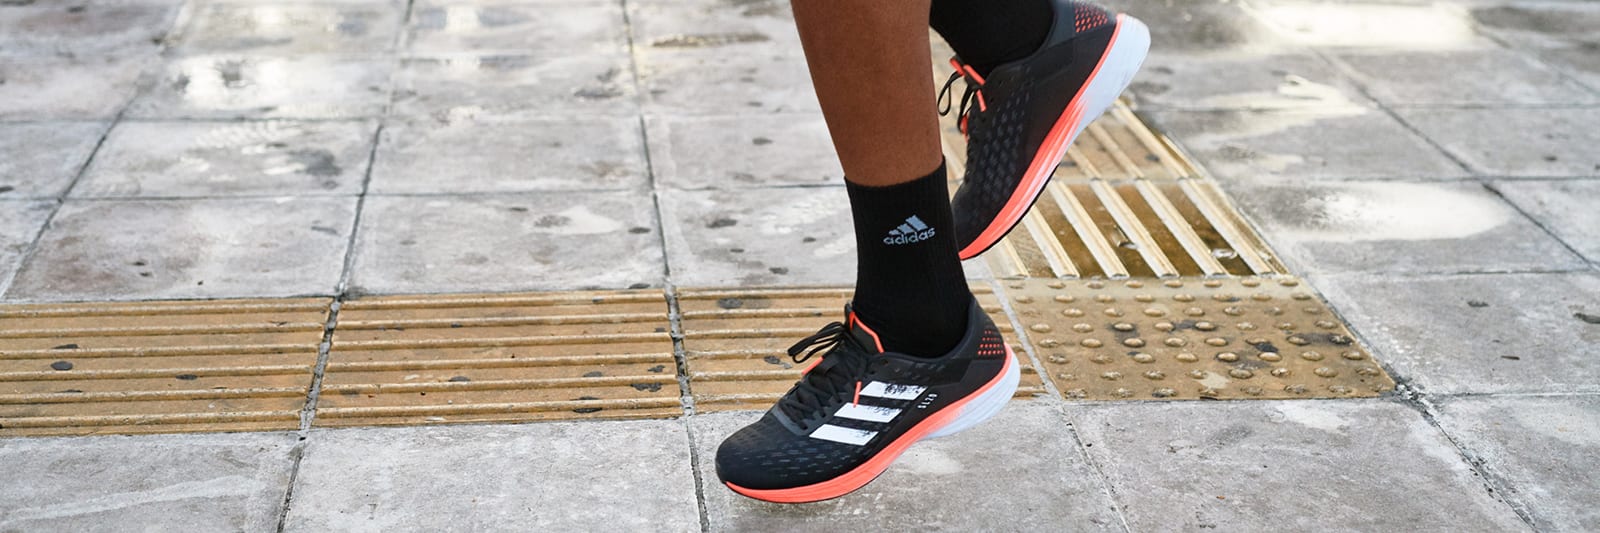 adidas running shoes with ankle support